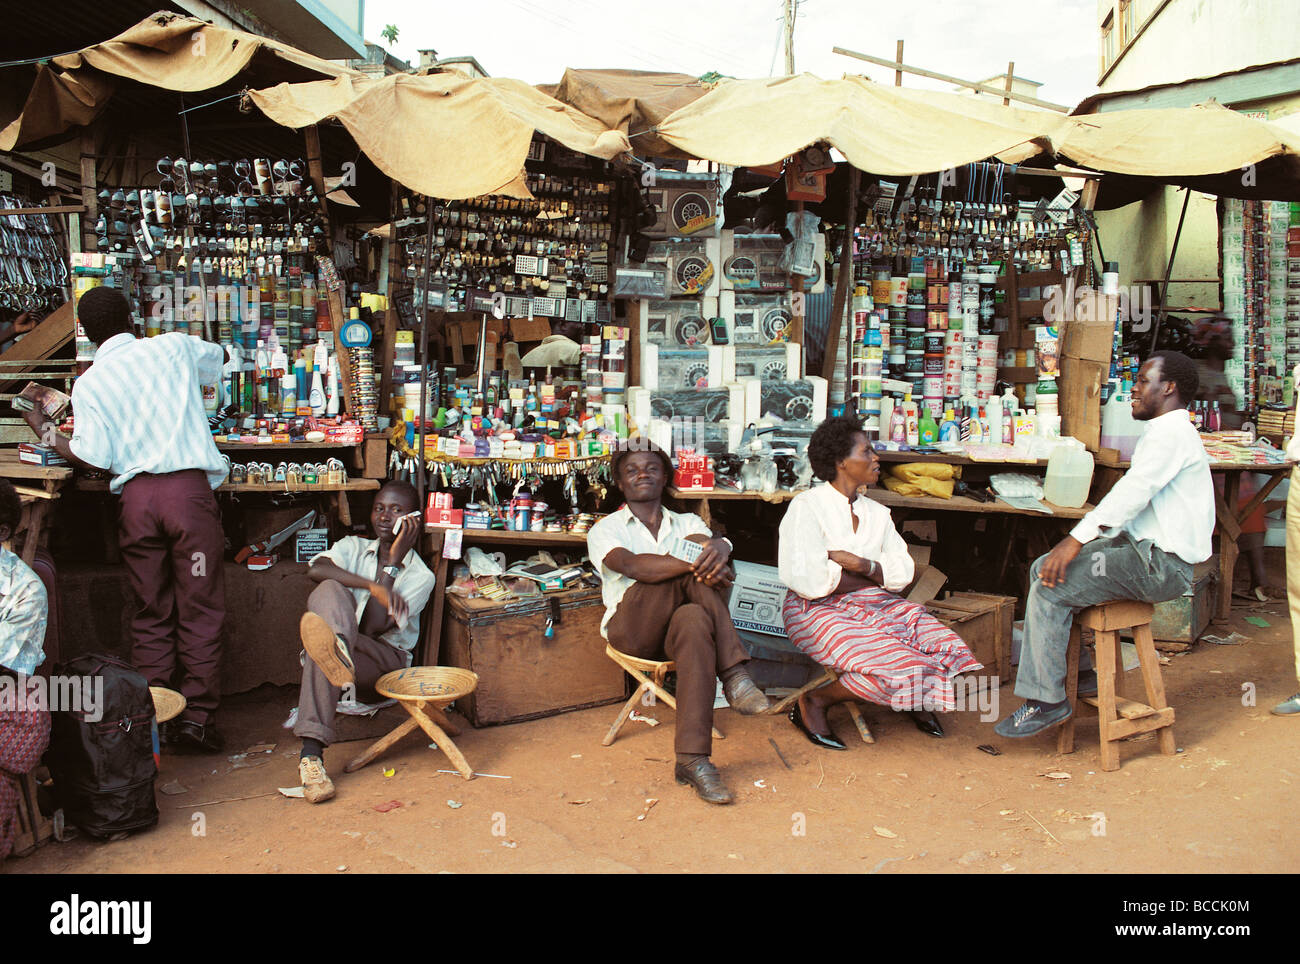 Traders sit relax waiting for customers at a market stall display of goods Kampala Uganda East Africa Stock Photo